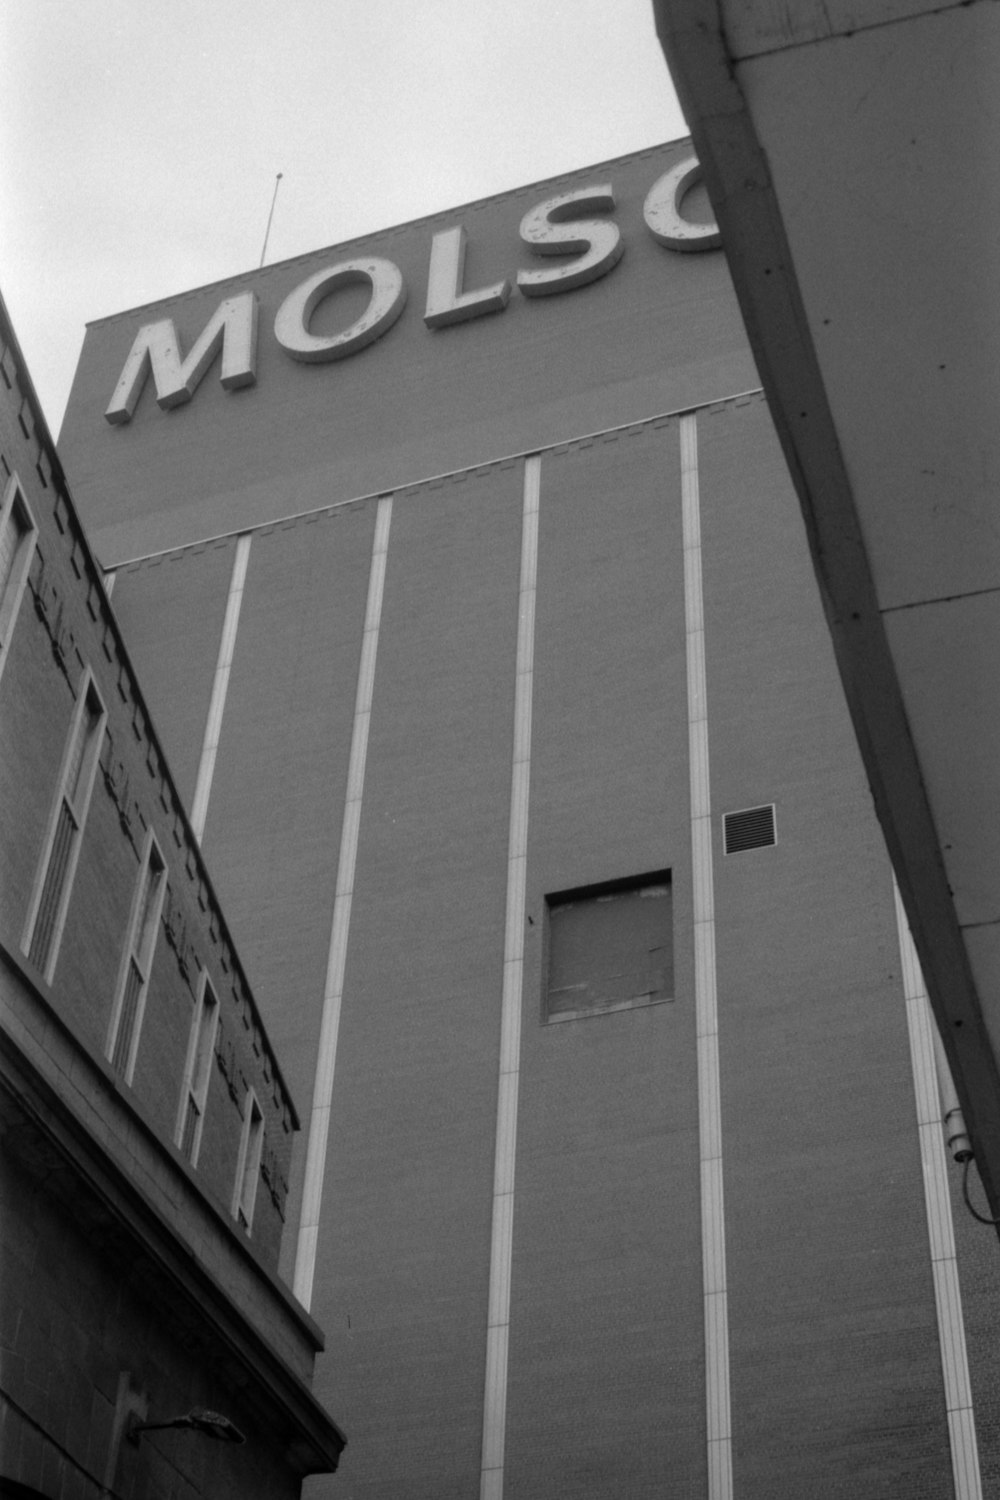 a black and white photo of a building with the word molsco on it